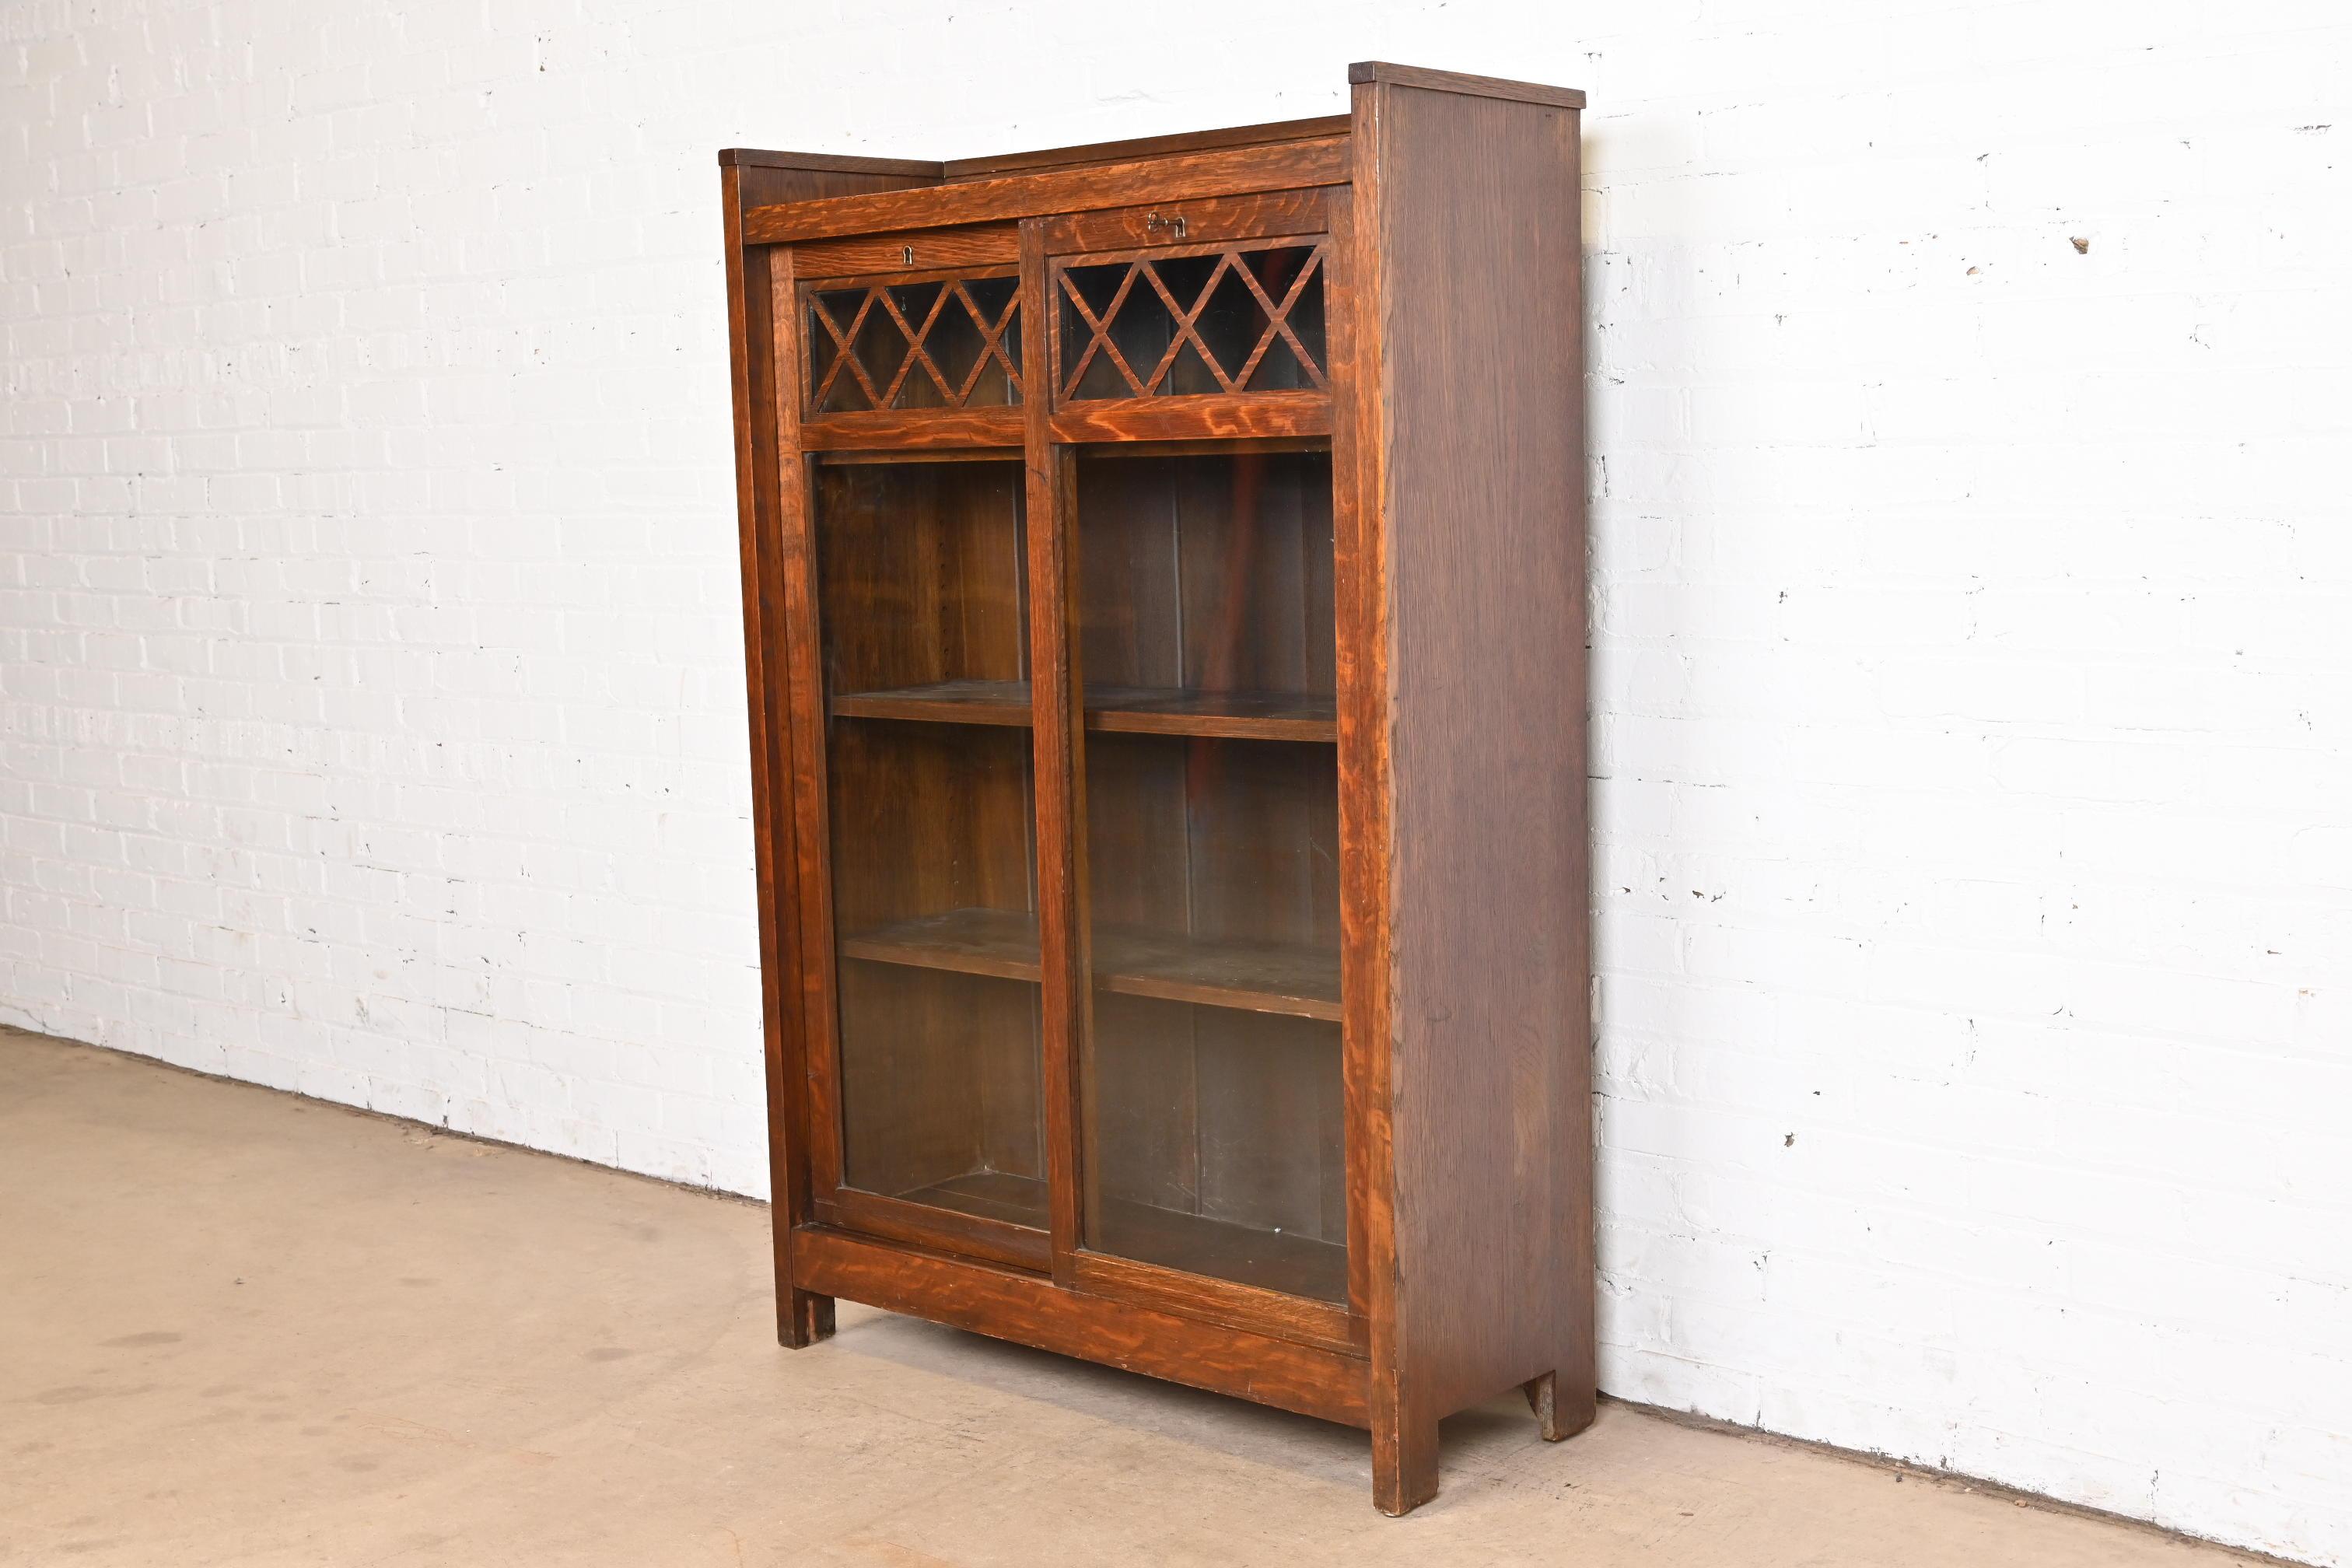 A gorgeous antique Mission or Arts & Crafts bookcase with sliding doors

In the manner of Stickley Brothers

USA, Circa 1900

Quarter sawn oak, with sliding glass front doors. Cabinet locks, and key is included.

Measures: 36